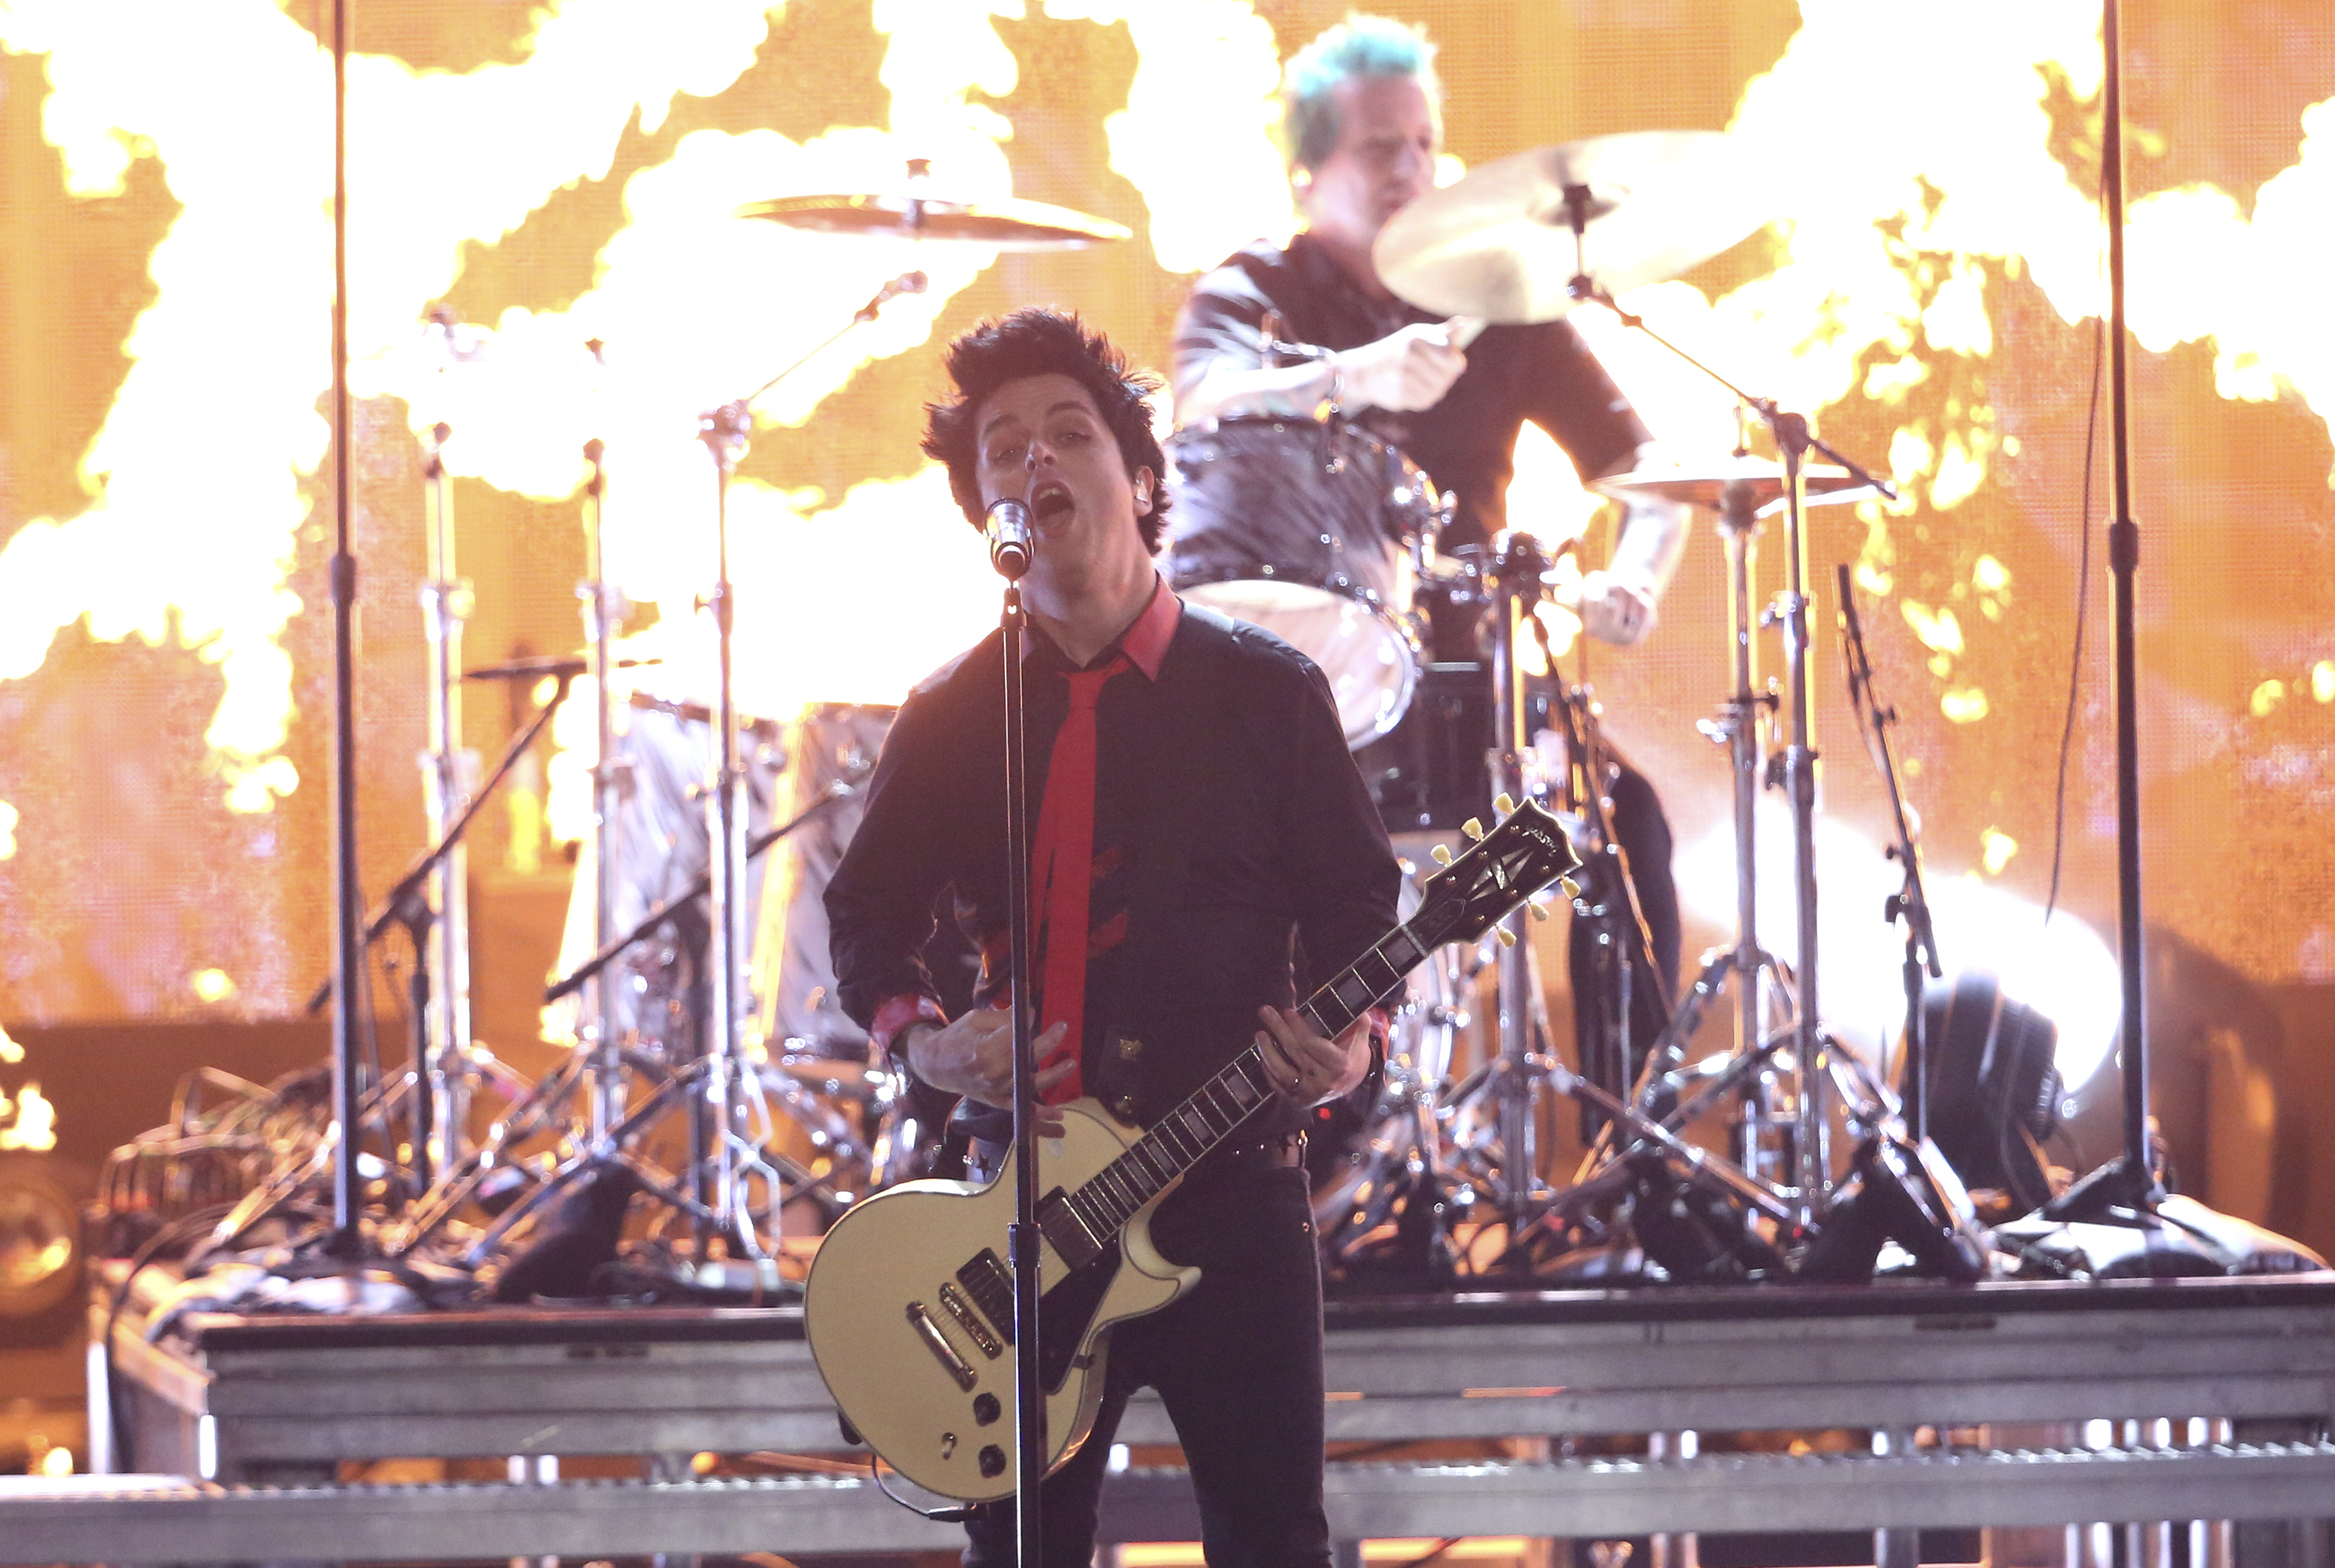 Green Day's Billie Joe Armstrong compares Donald Trump to Hitler